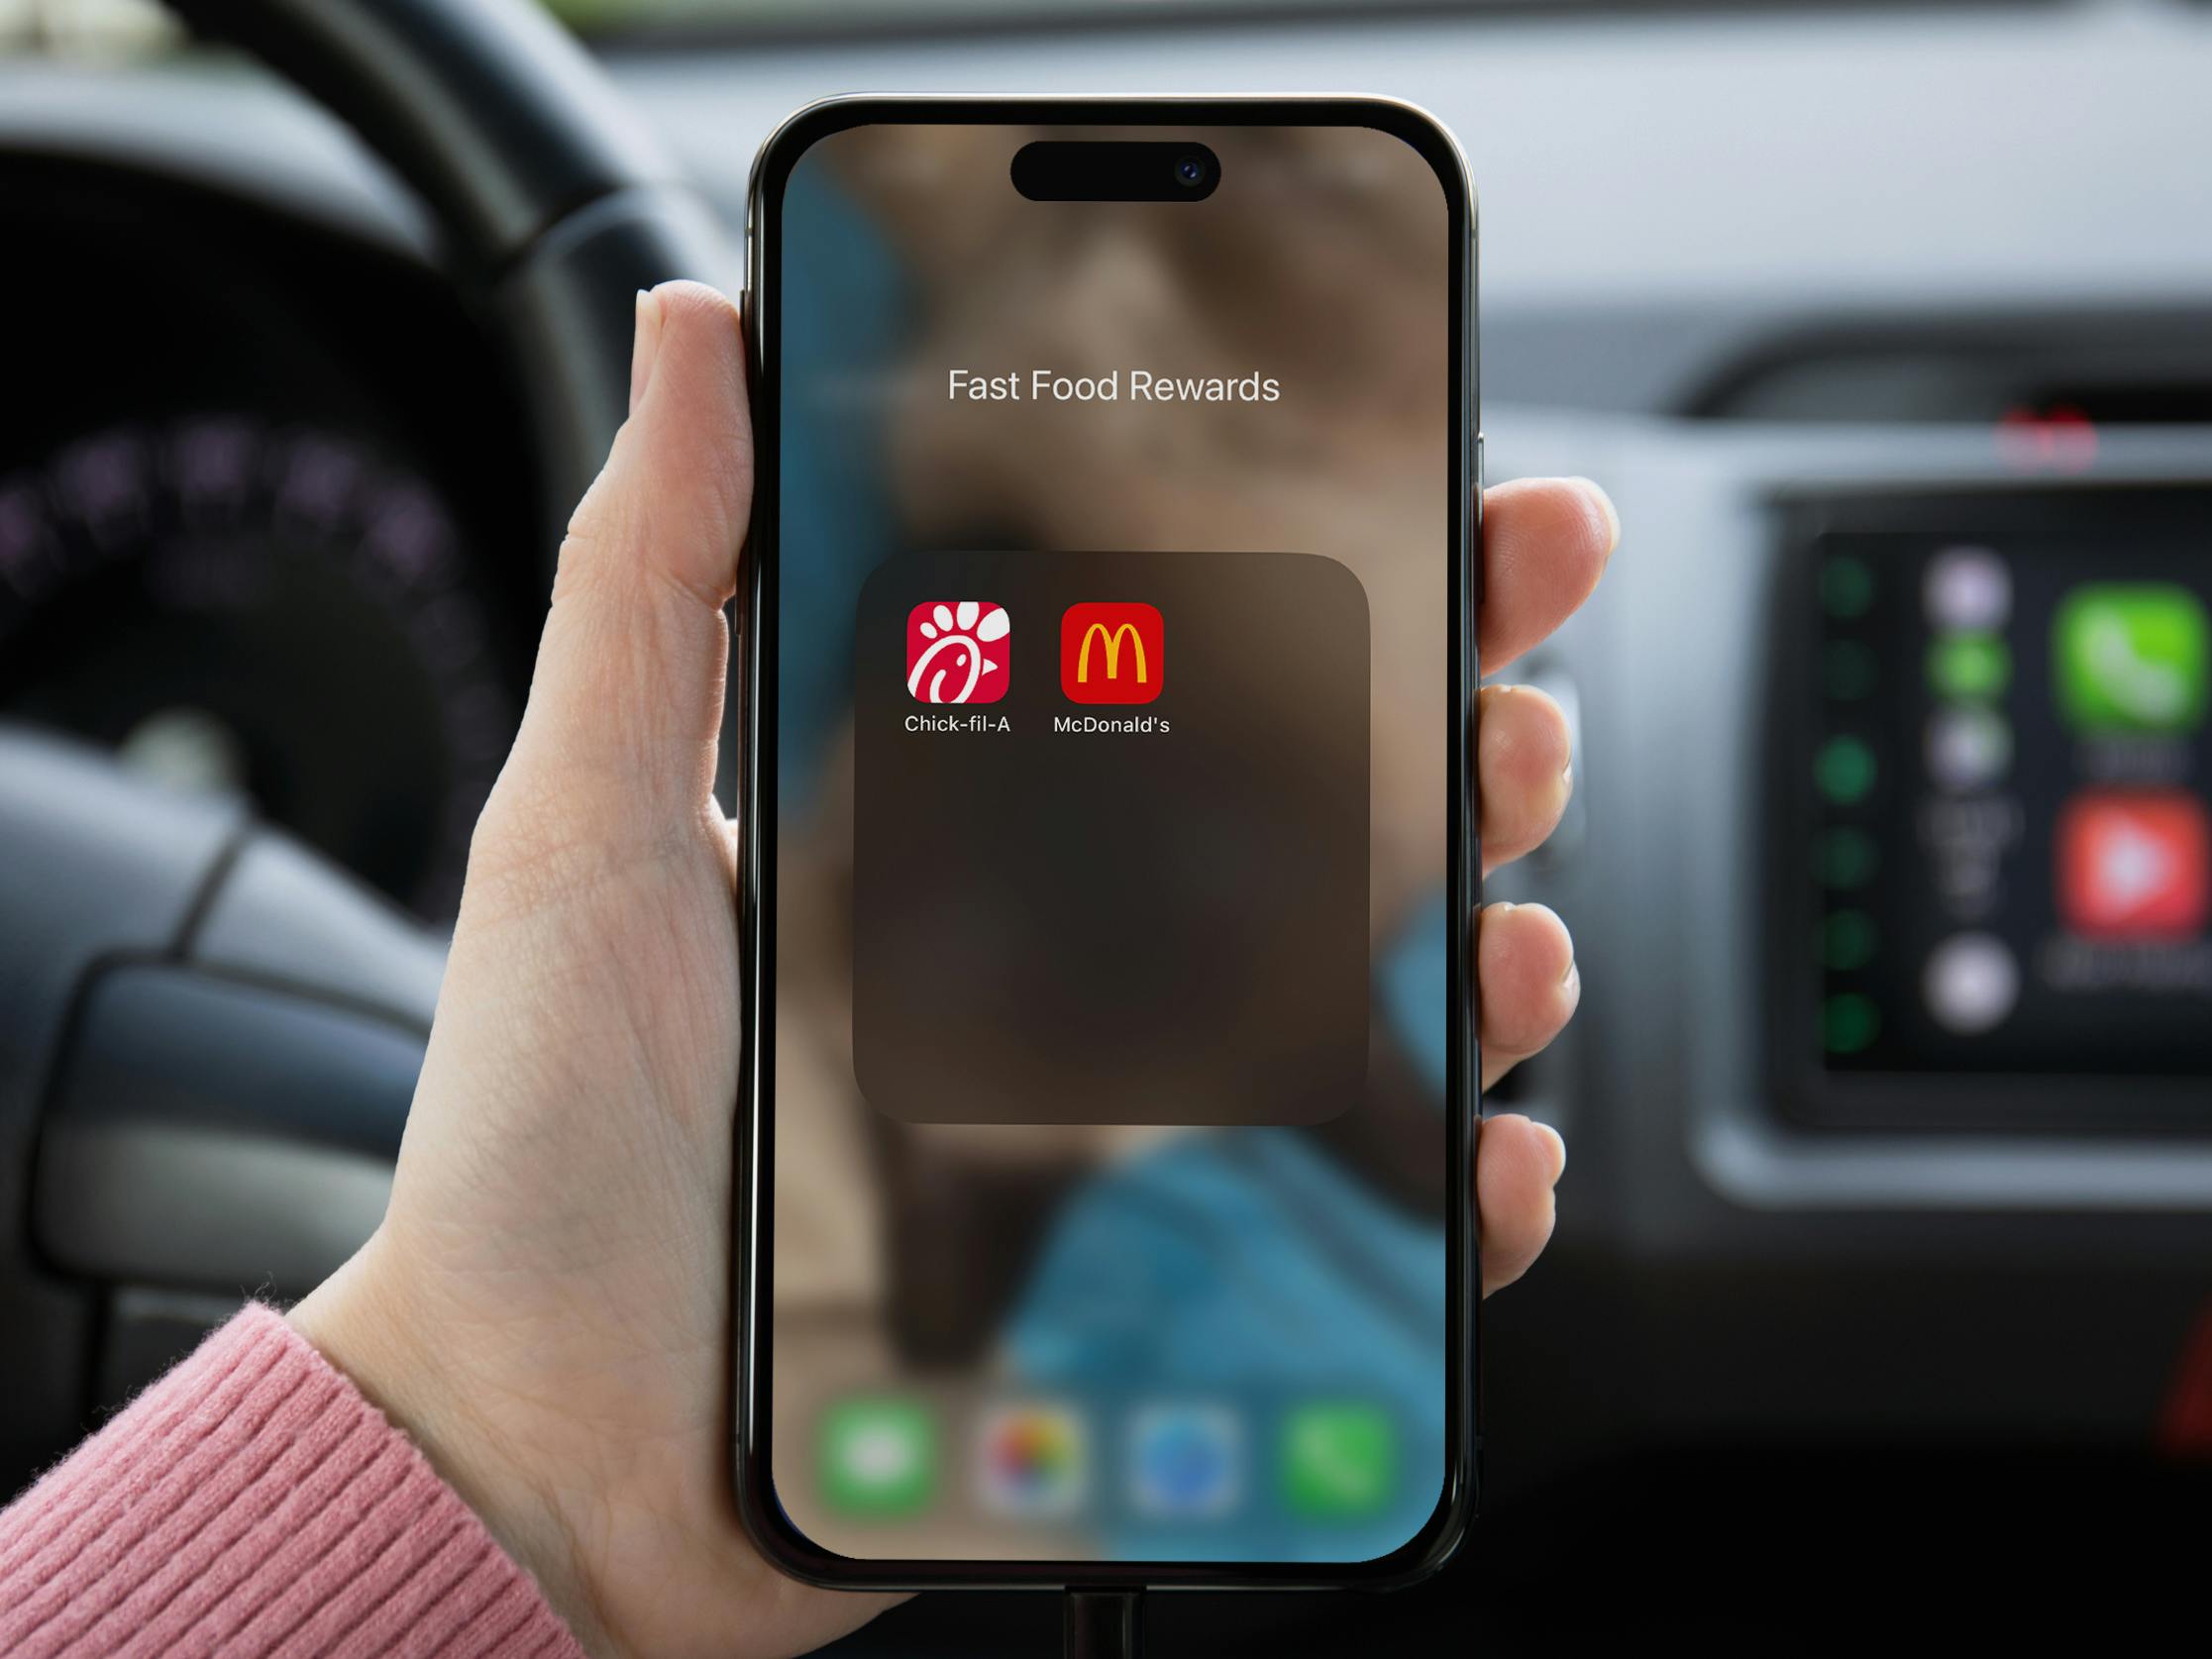 chick-fil-a vs. mcdonalds - Someone sitting in a car, holding a phone displaying an app folder labeled "Fast Food Rewards" with the McDonalds and Chick-fil-A apps organized into it